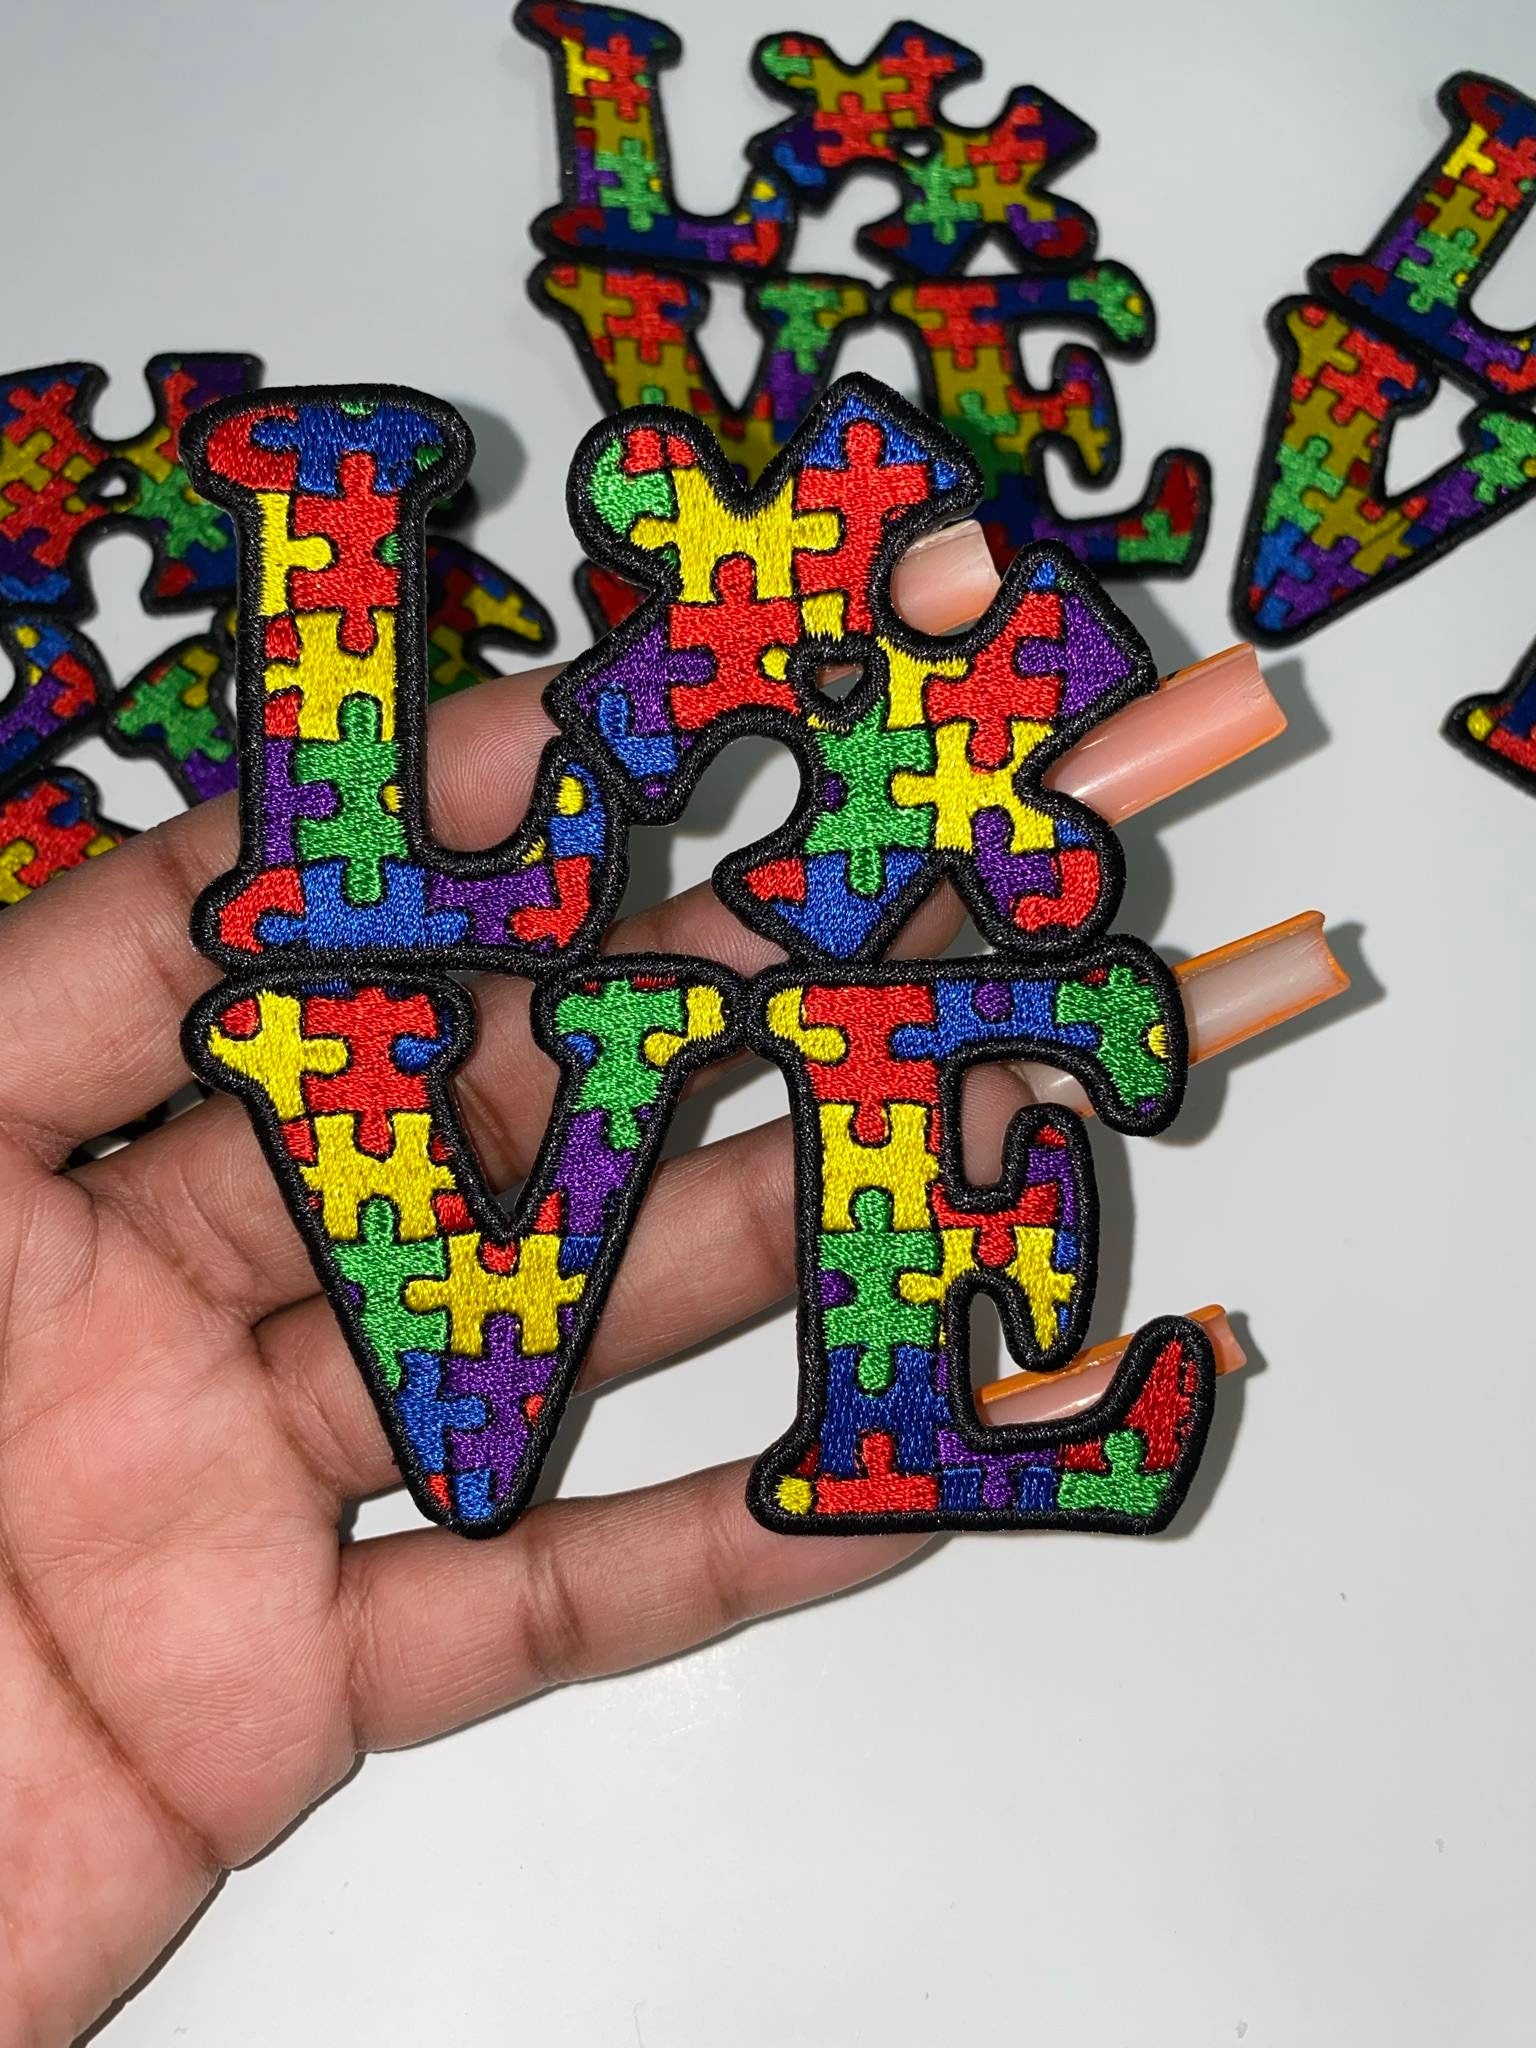 New, Autism Awareness "Love" Puzzle Piece Patch, Size 4" Embroidered Patch, 1-pc, Iron or Sew-on, Patch for Jacket or Vest